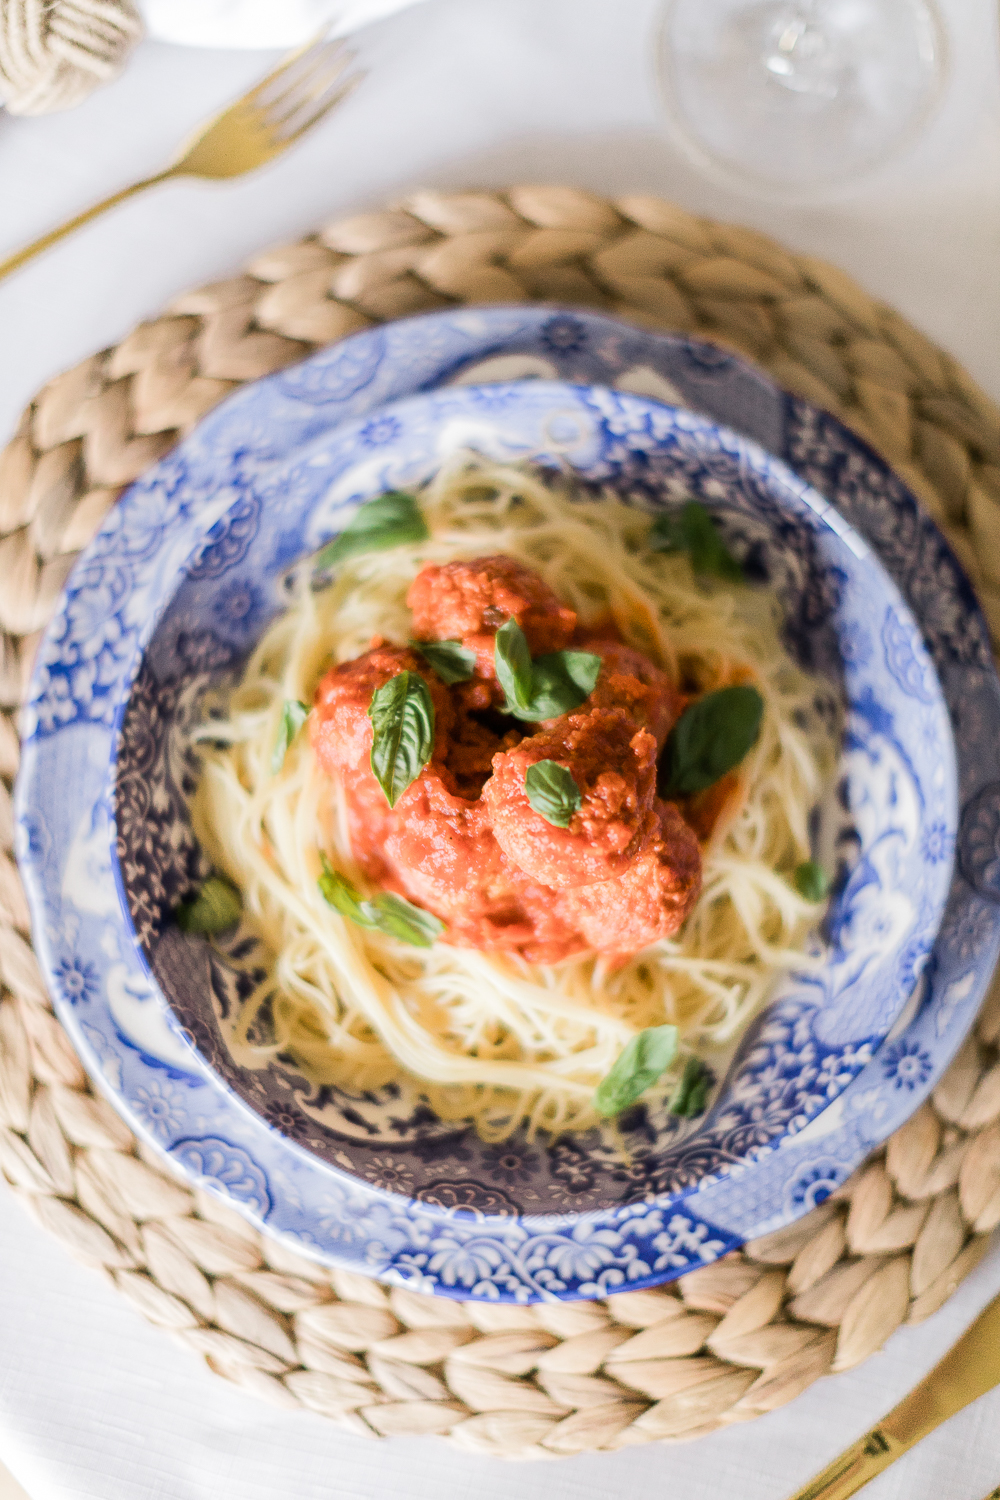 Spaghetti and Pure Farmland Plant-Based Meatballs Recipe by affordable entertaining blogger Stephanie Ziajka from Diary of a Debutante, blue and white tablescape idea, blue and white Italian tablescape, Spode Blue Italian Dinner Plates and Pasta Bowls, blue delft tablescape idea